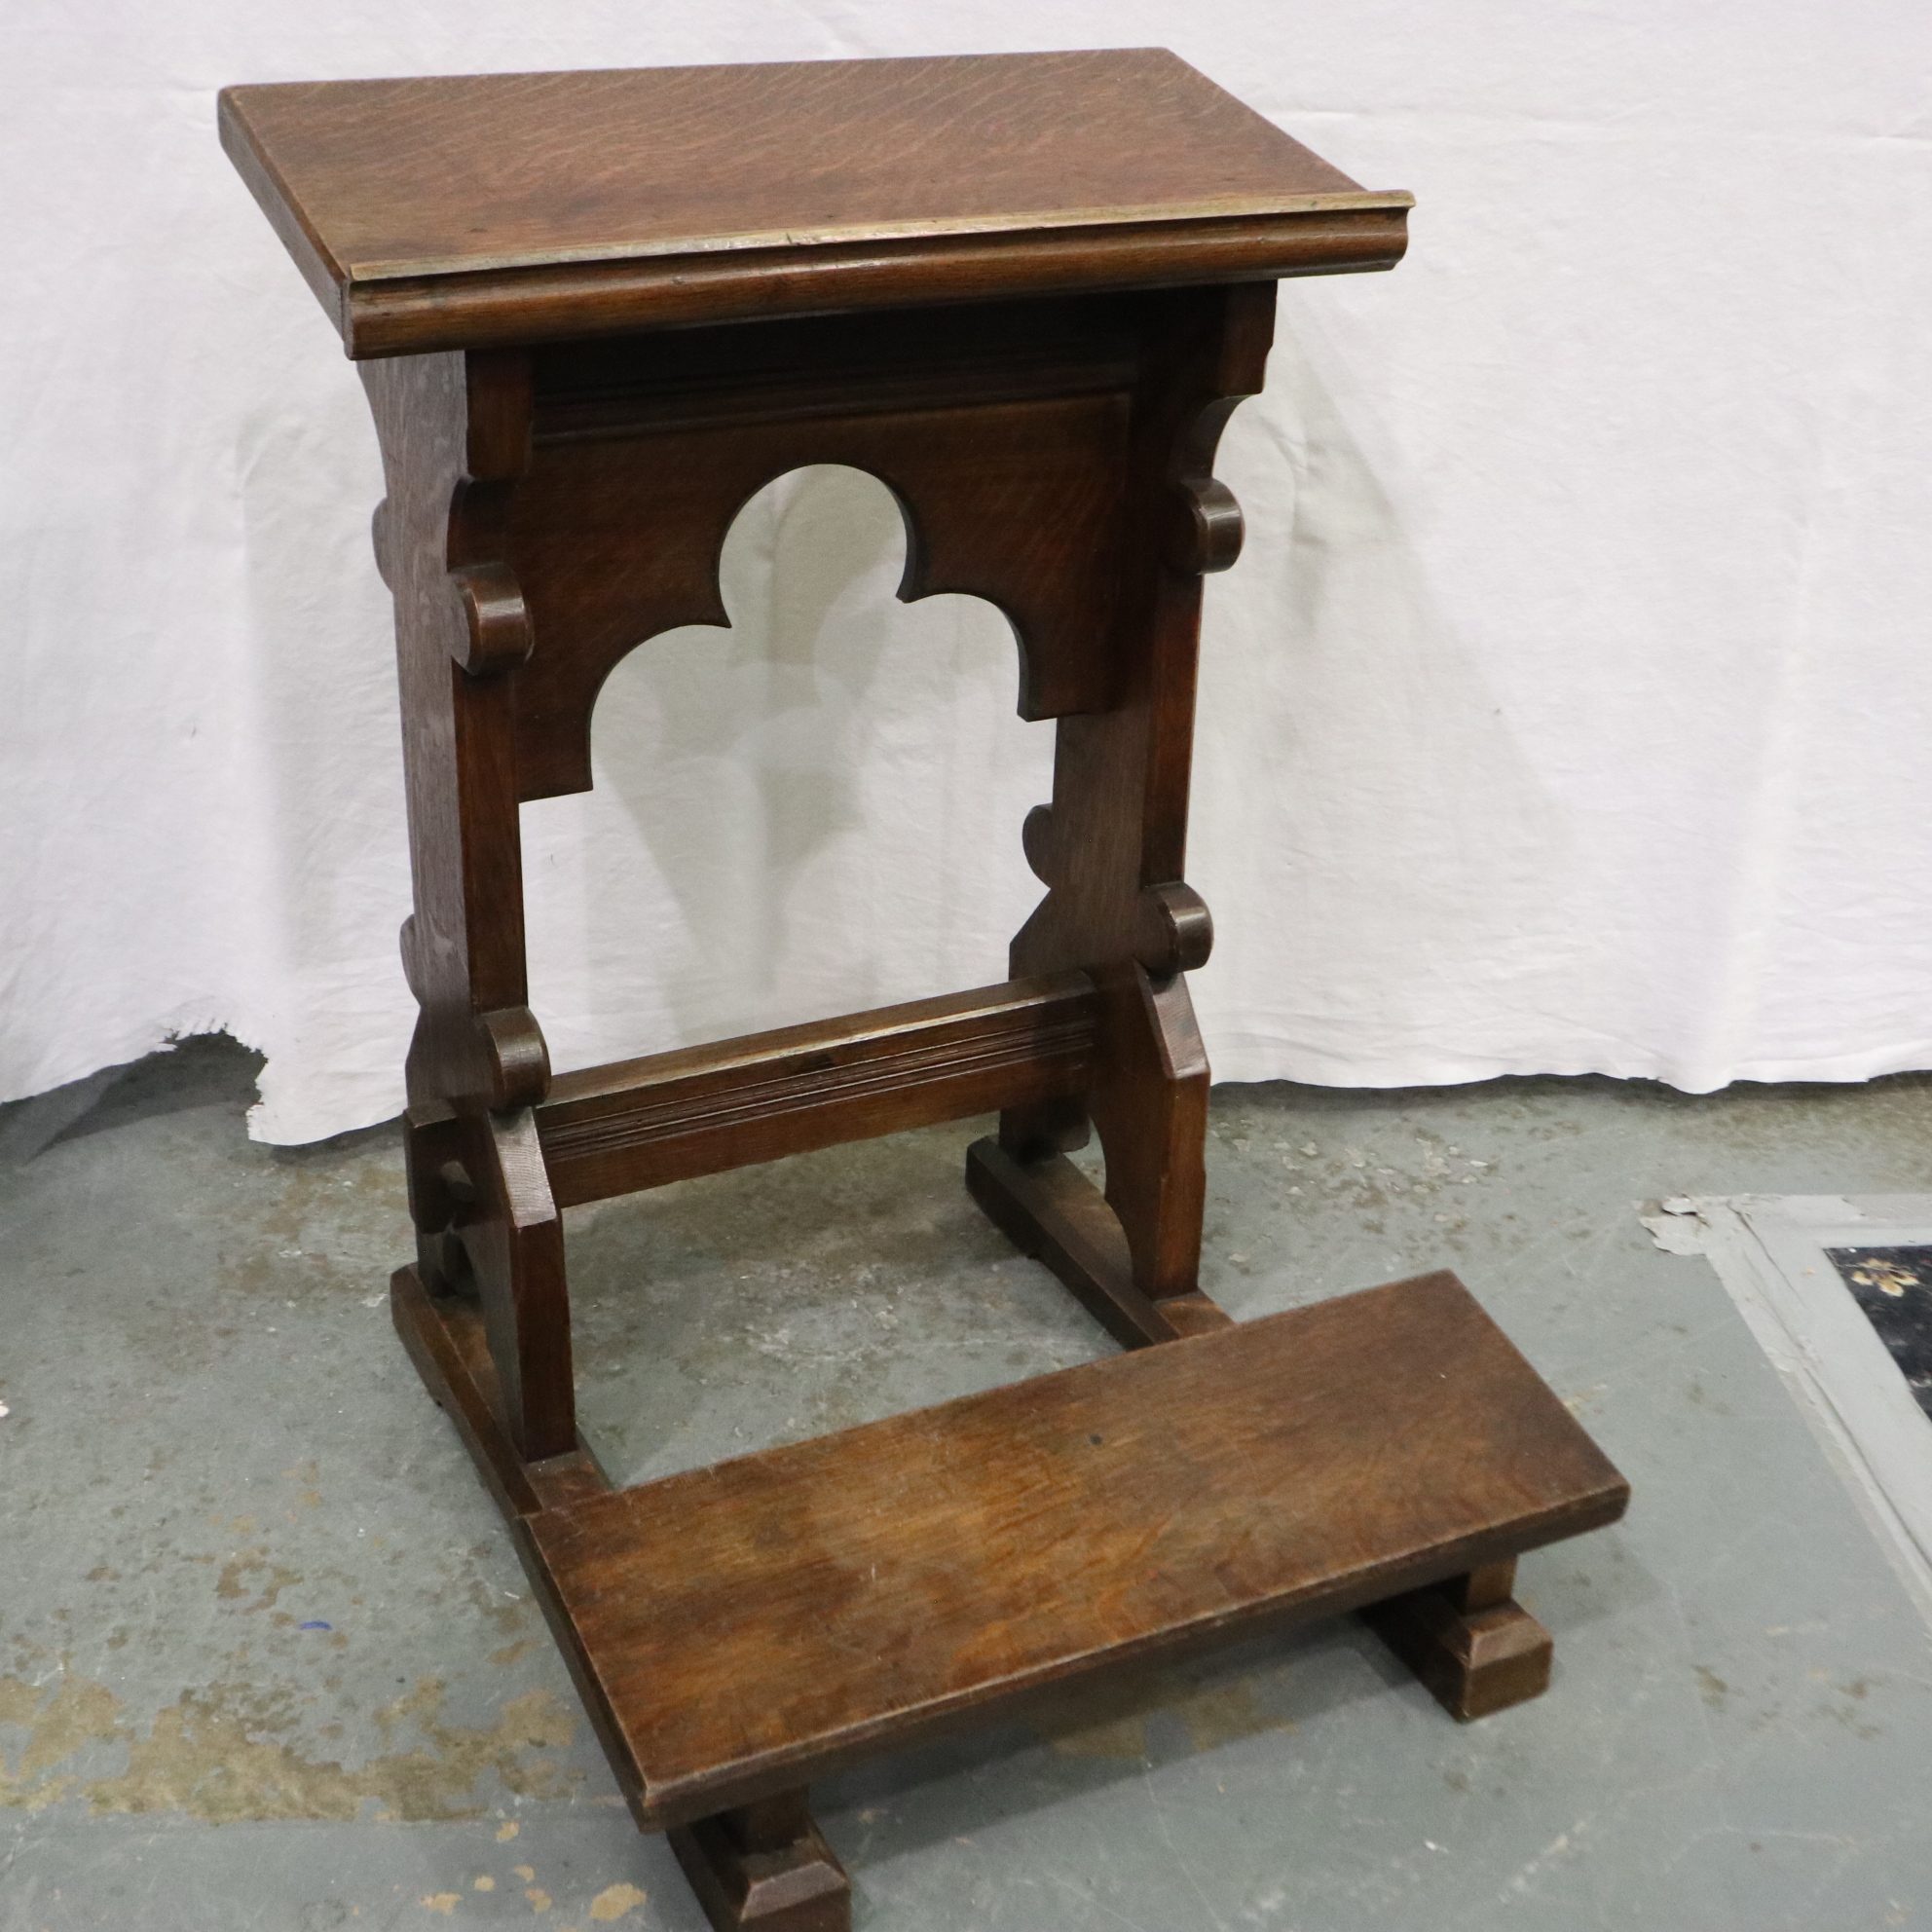 A 19th century oak ecclesiastical kneeler with book rest, 60 x 60 x 84 cm H. Not available for in-